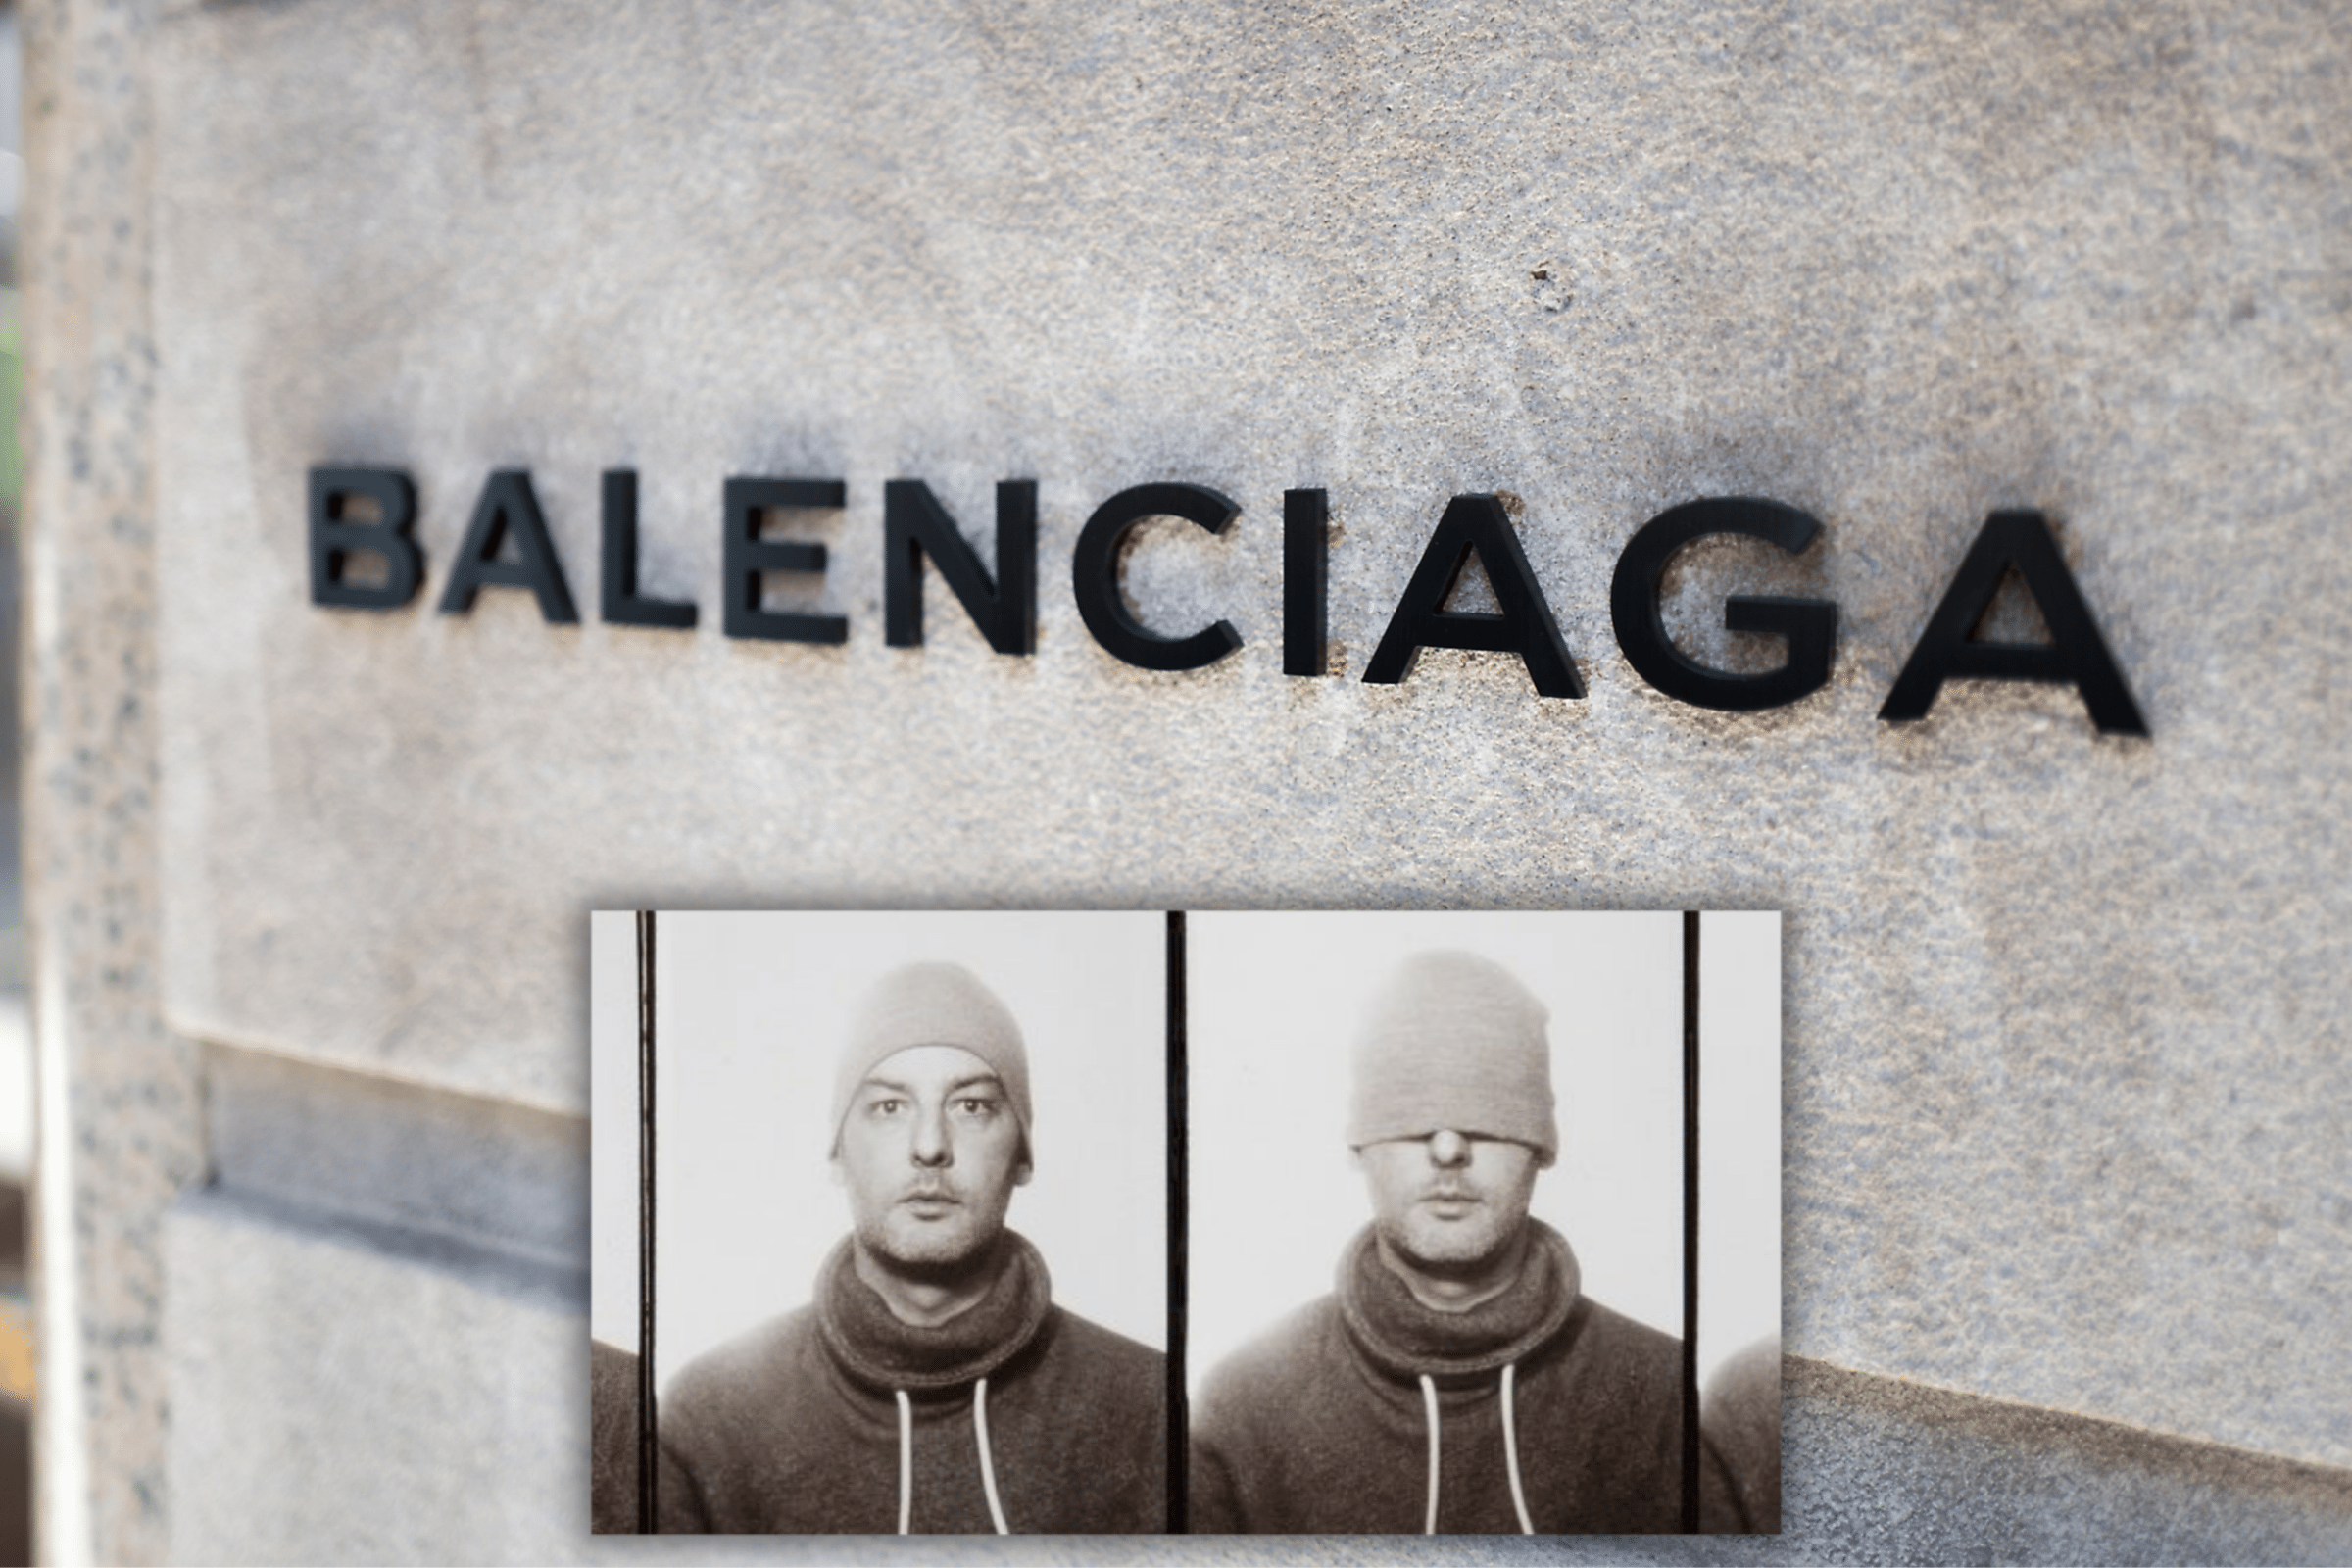 Balenciaga sues producers of campaign that included SCOTUS child porn  ruling